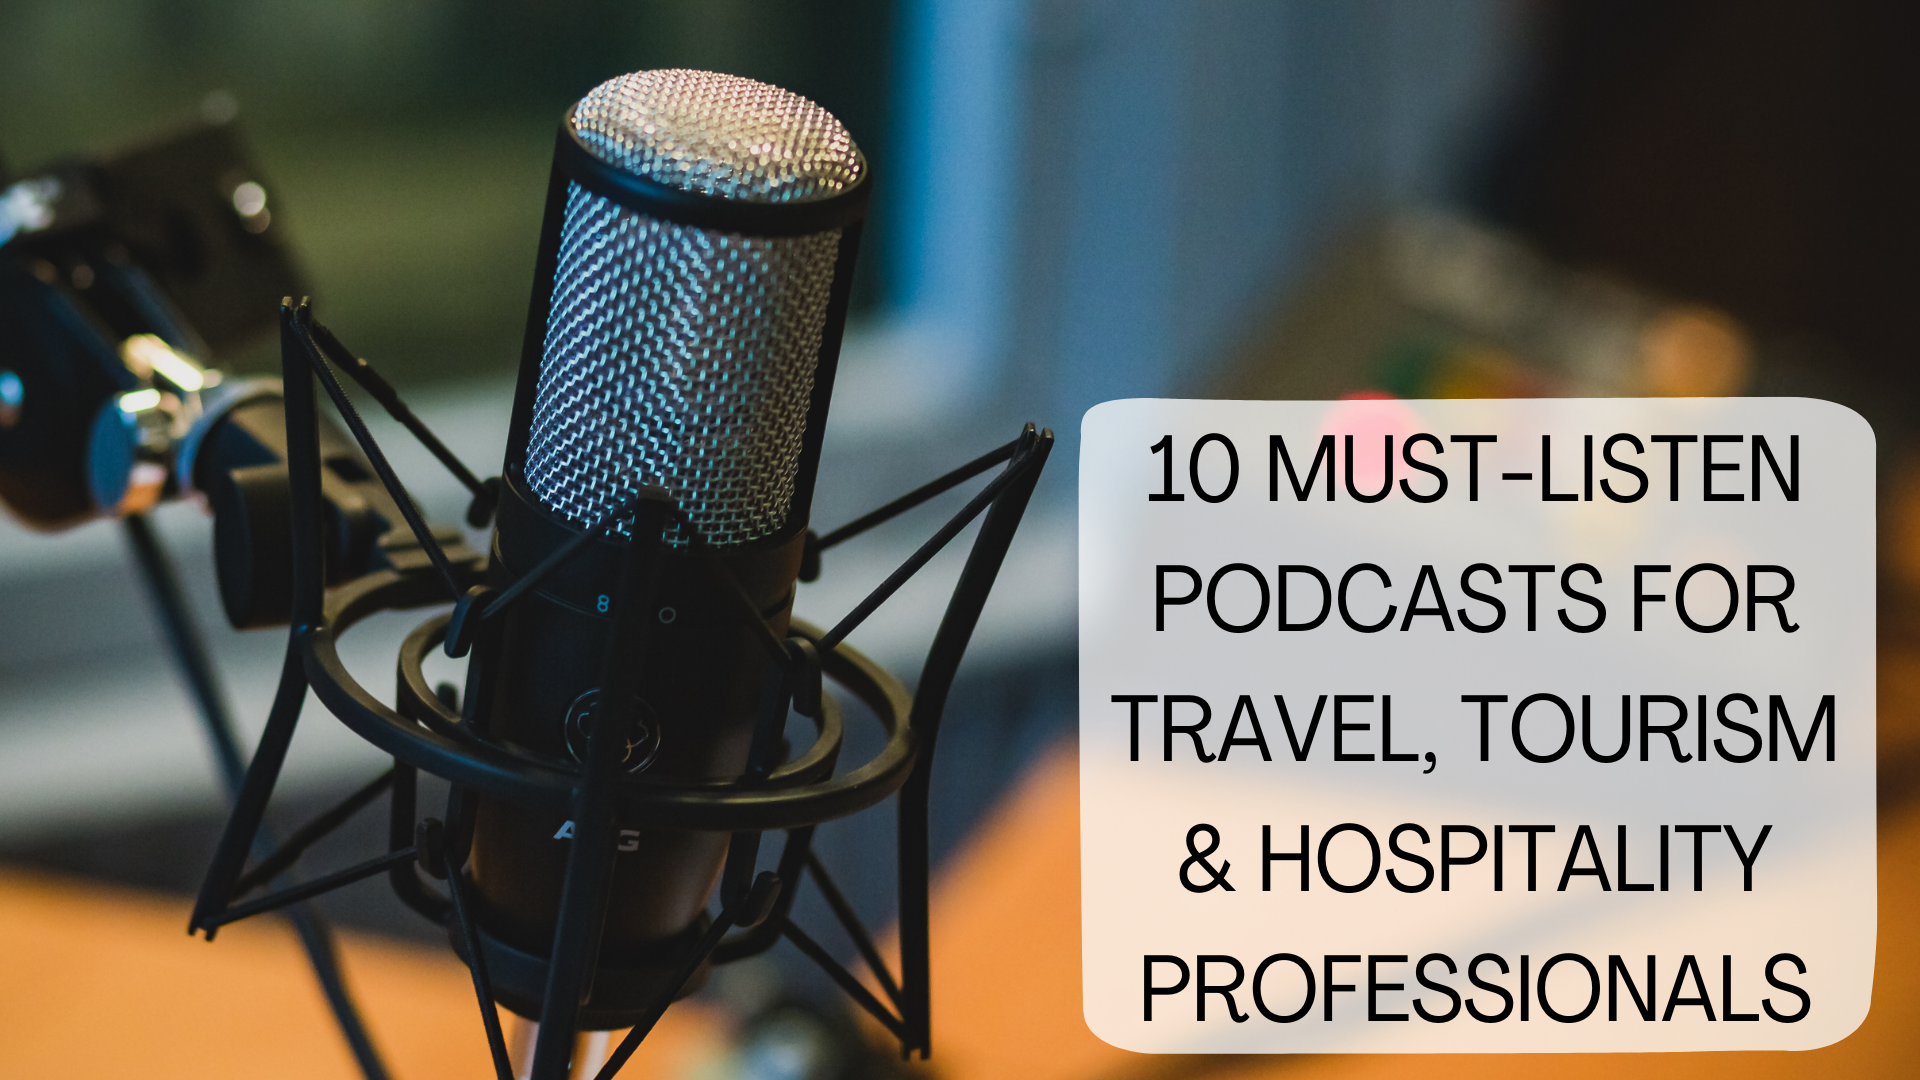 10 must listen podcasts for professionals